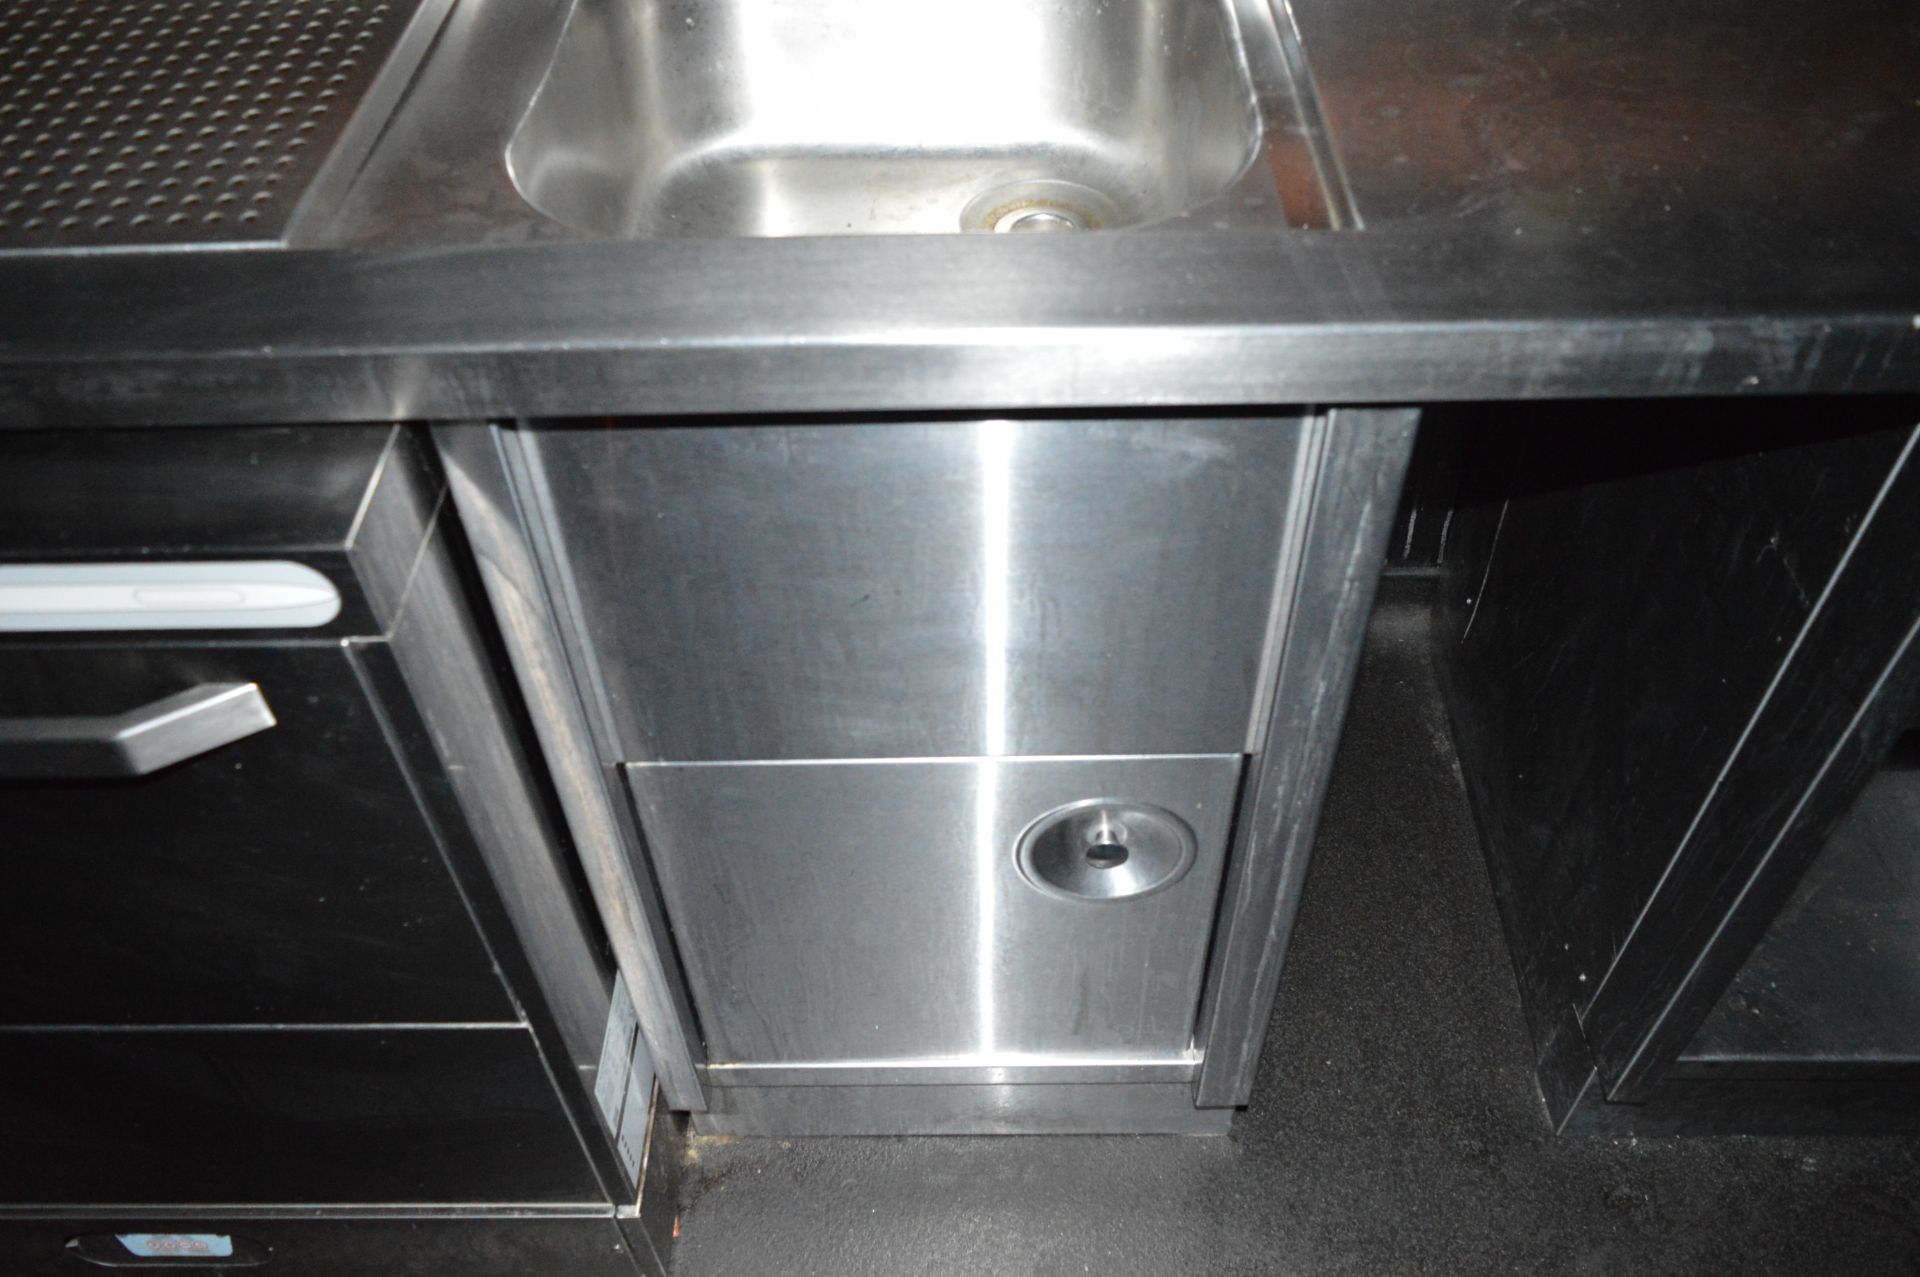 1 x Stainless Steel Bar Server Unit With Wash Basins - More Info to Follow - CL350 - Ref In2-060 - - Image 7 of 11